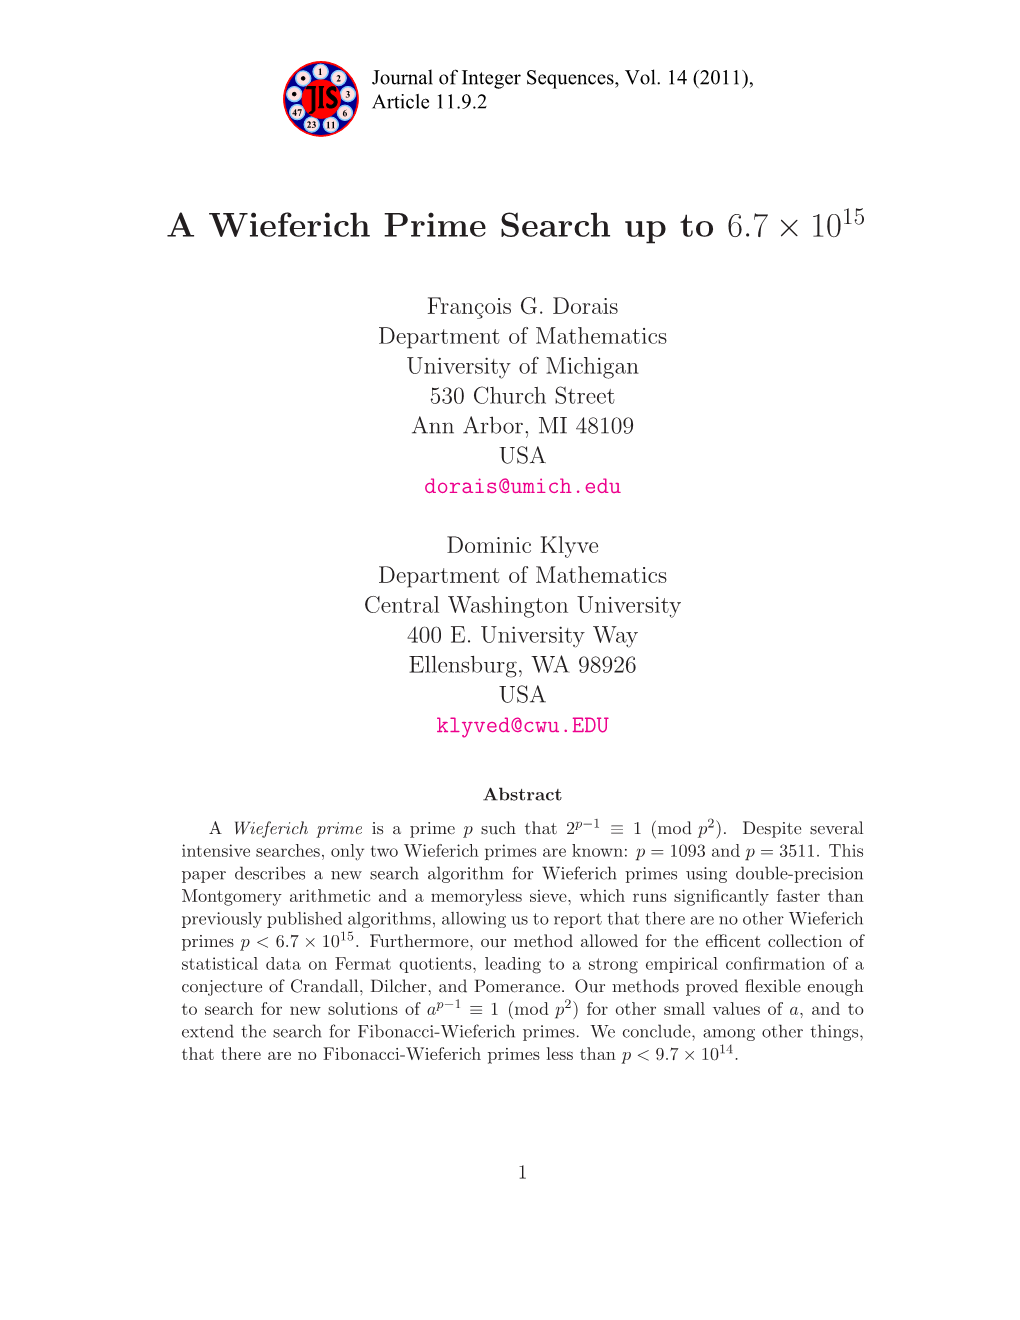 A Wieferich Prime Search up to 6.7 × 1015